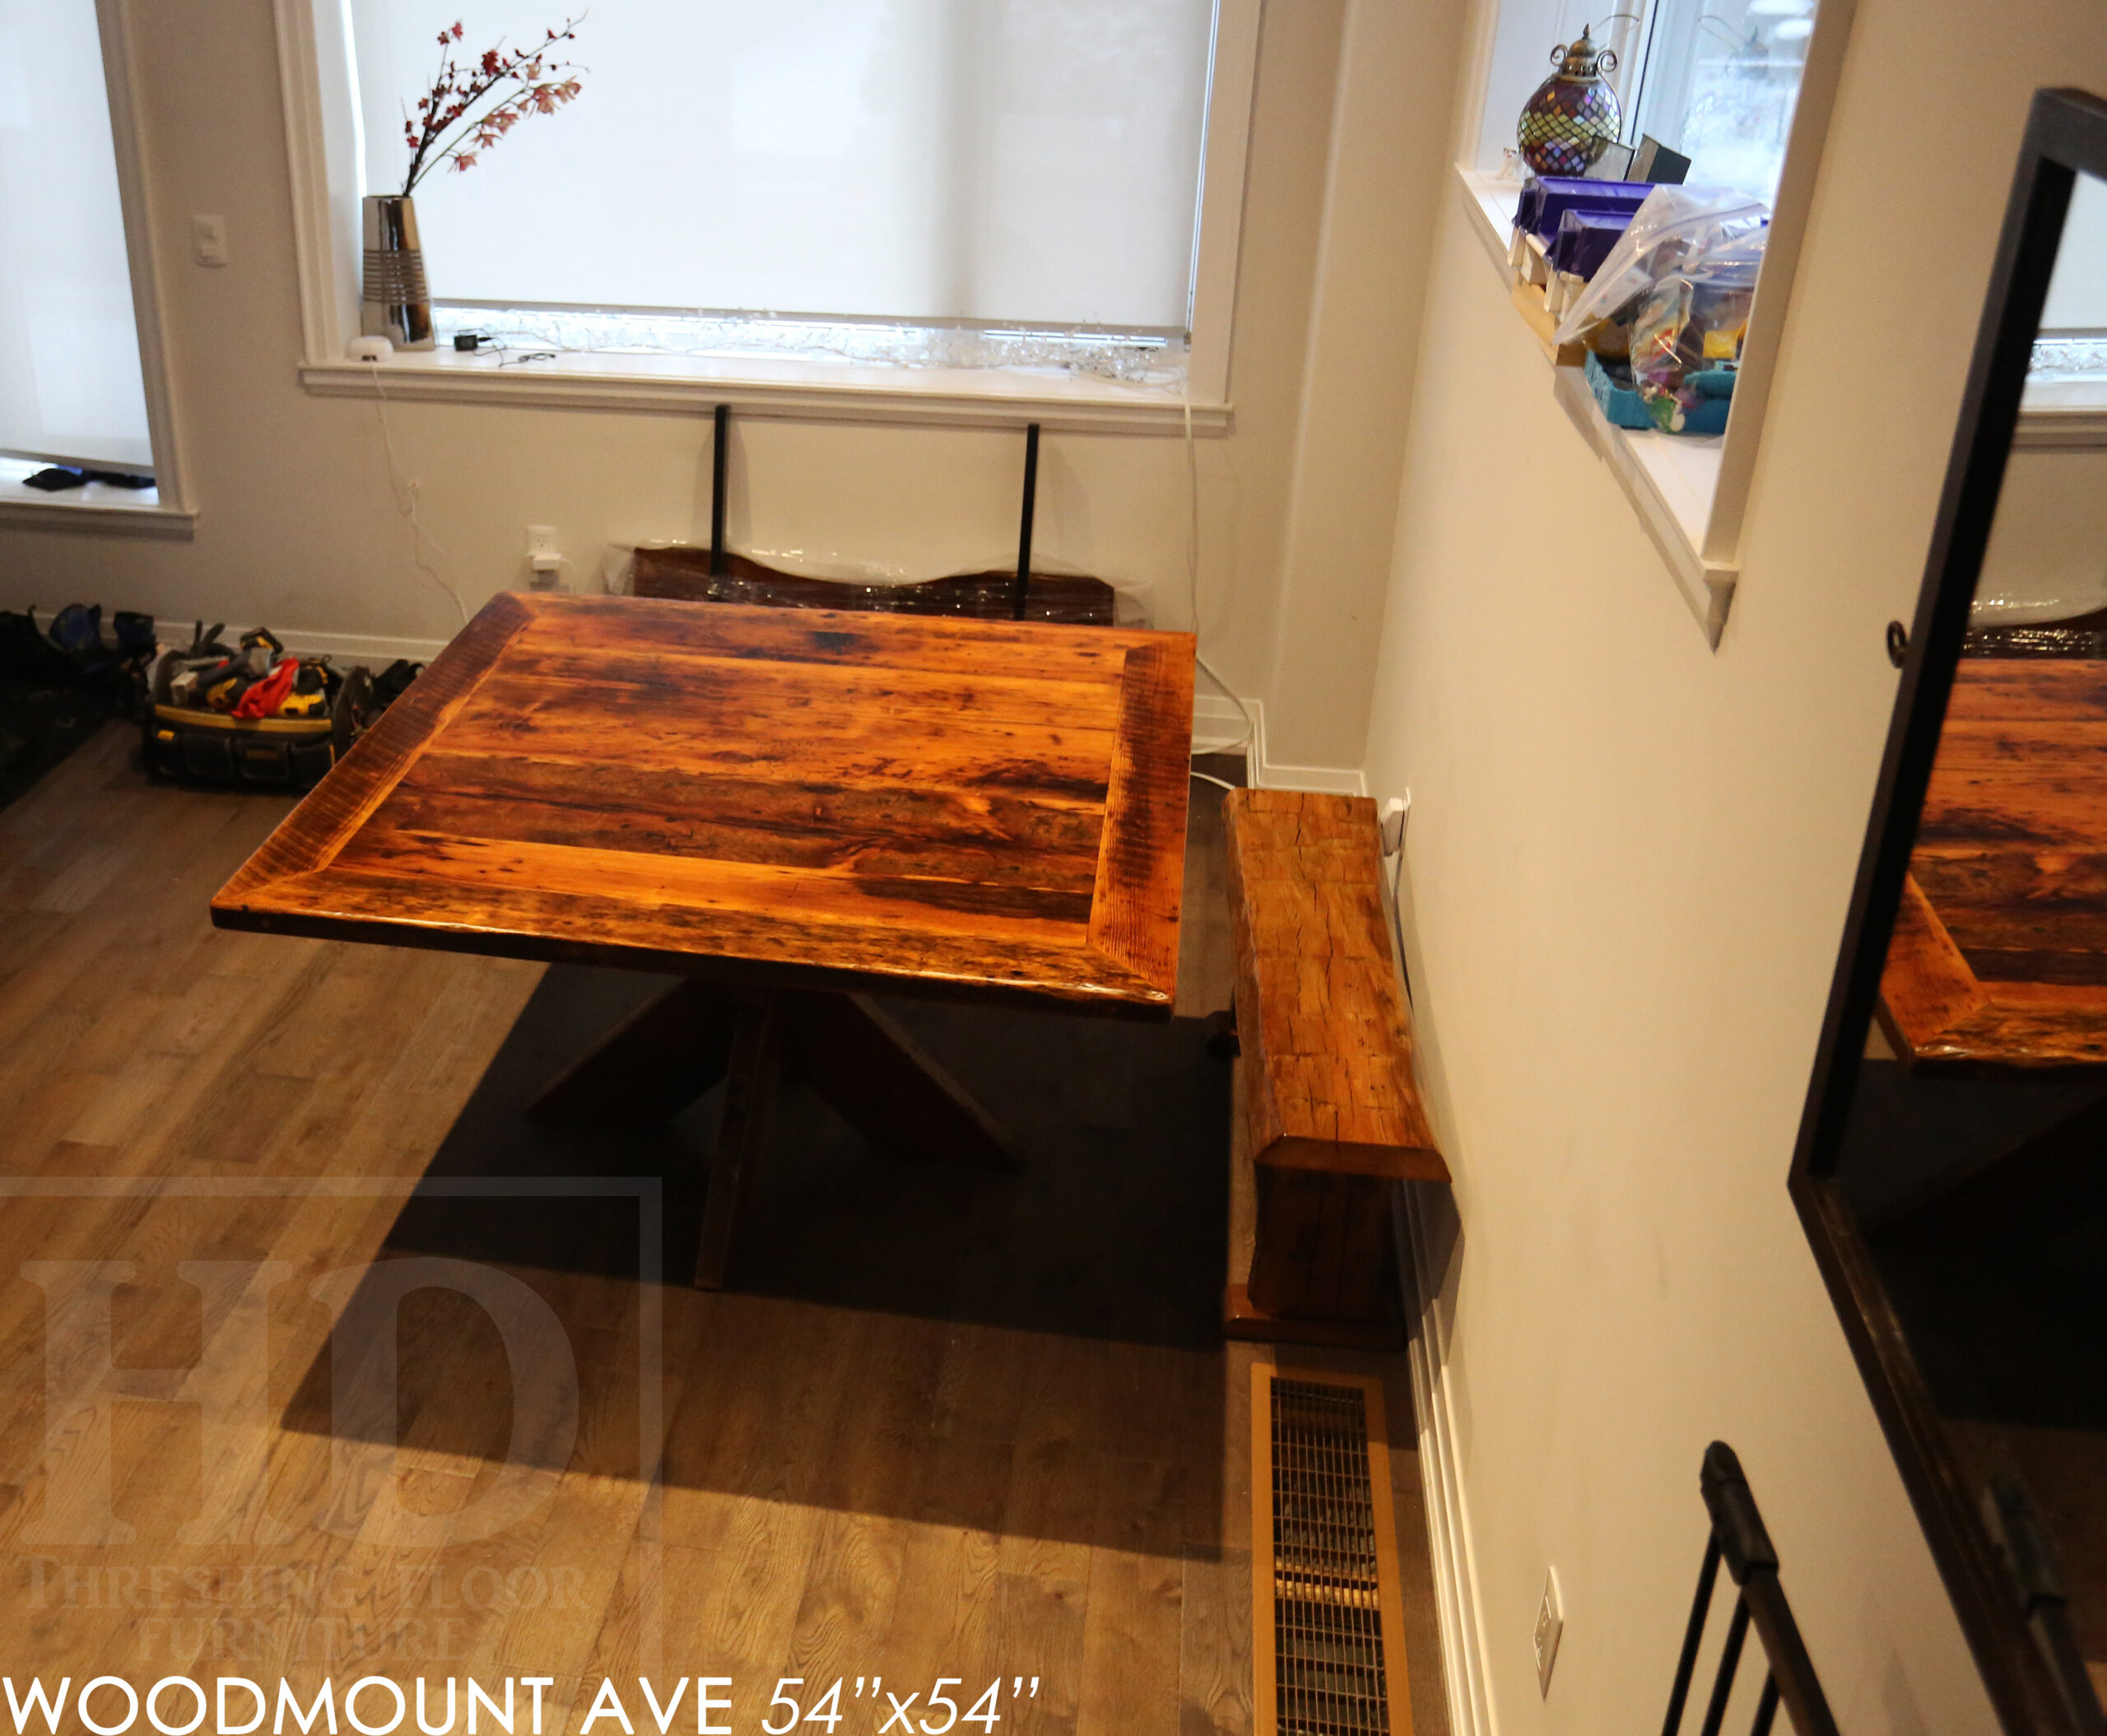 54" x 54" Square Reclaimed Wood Table we made for a Toronto home - X Shaped Base - Hemlock Threshing Floor 2" Construction - Original edges & distressing maintained - Premium epoxy + satin polyurethane finish - www.table.ca